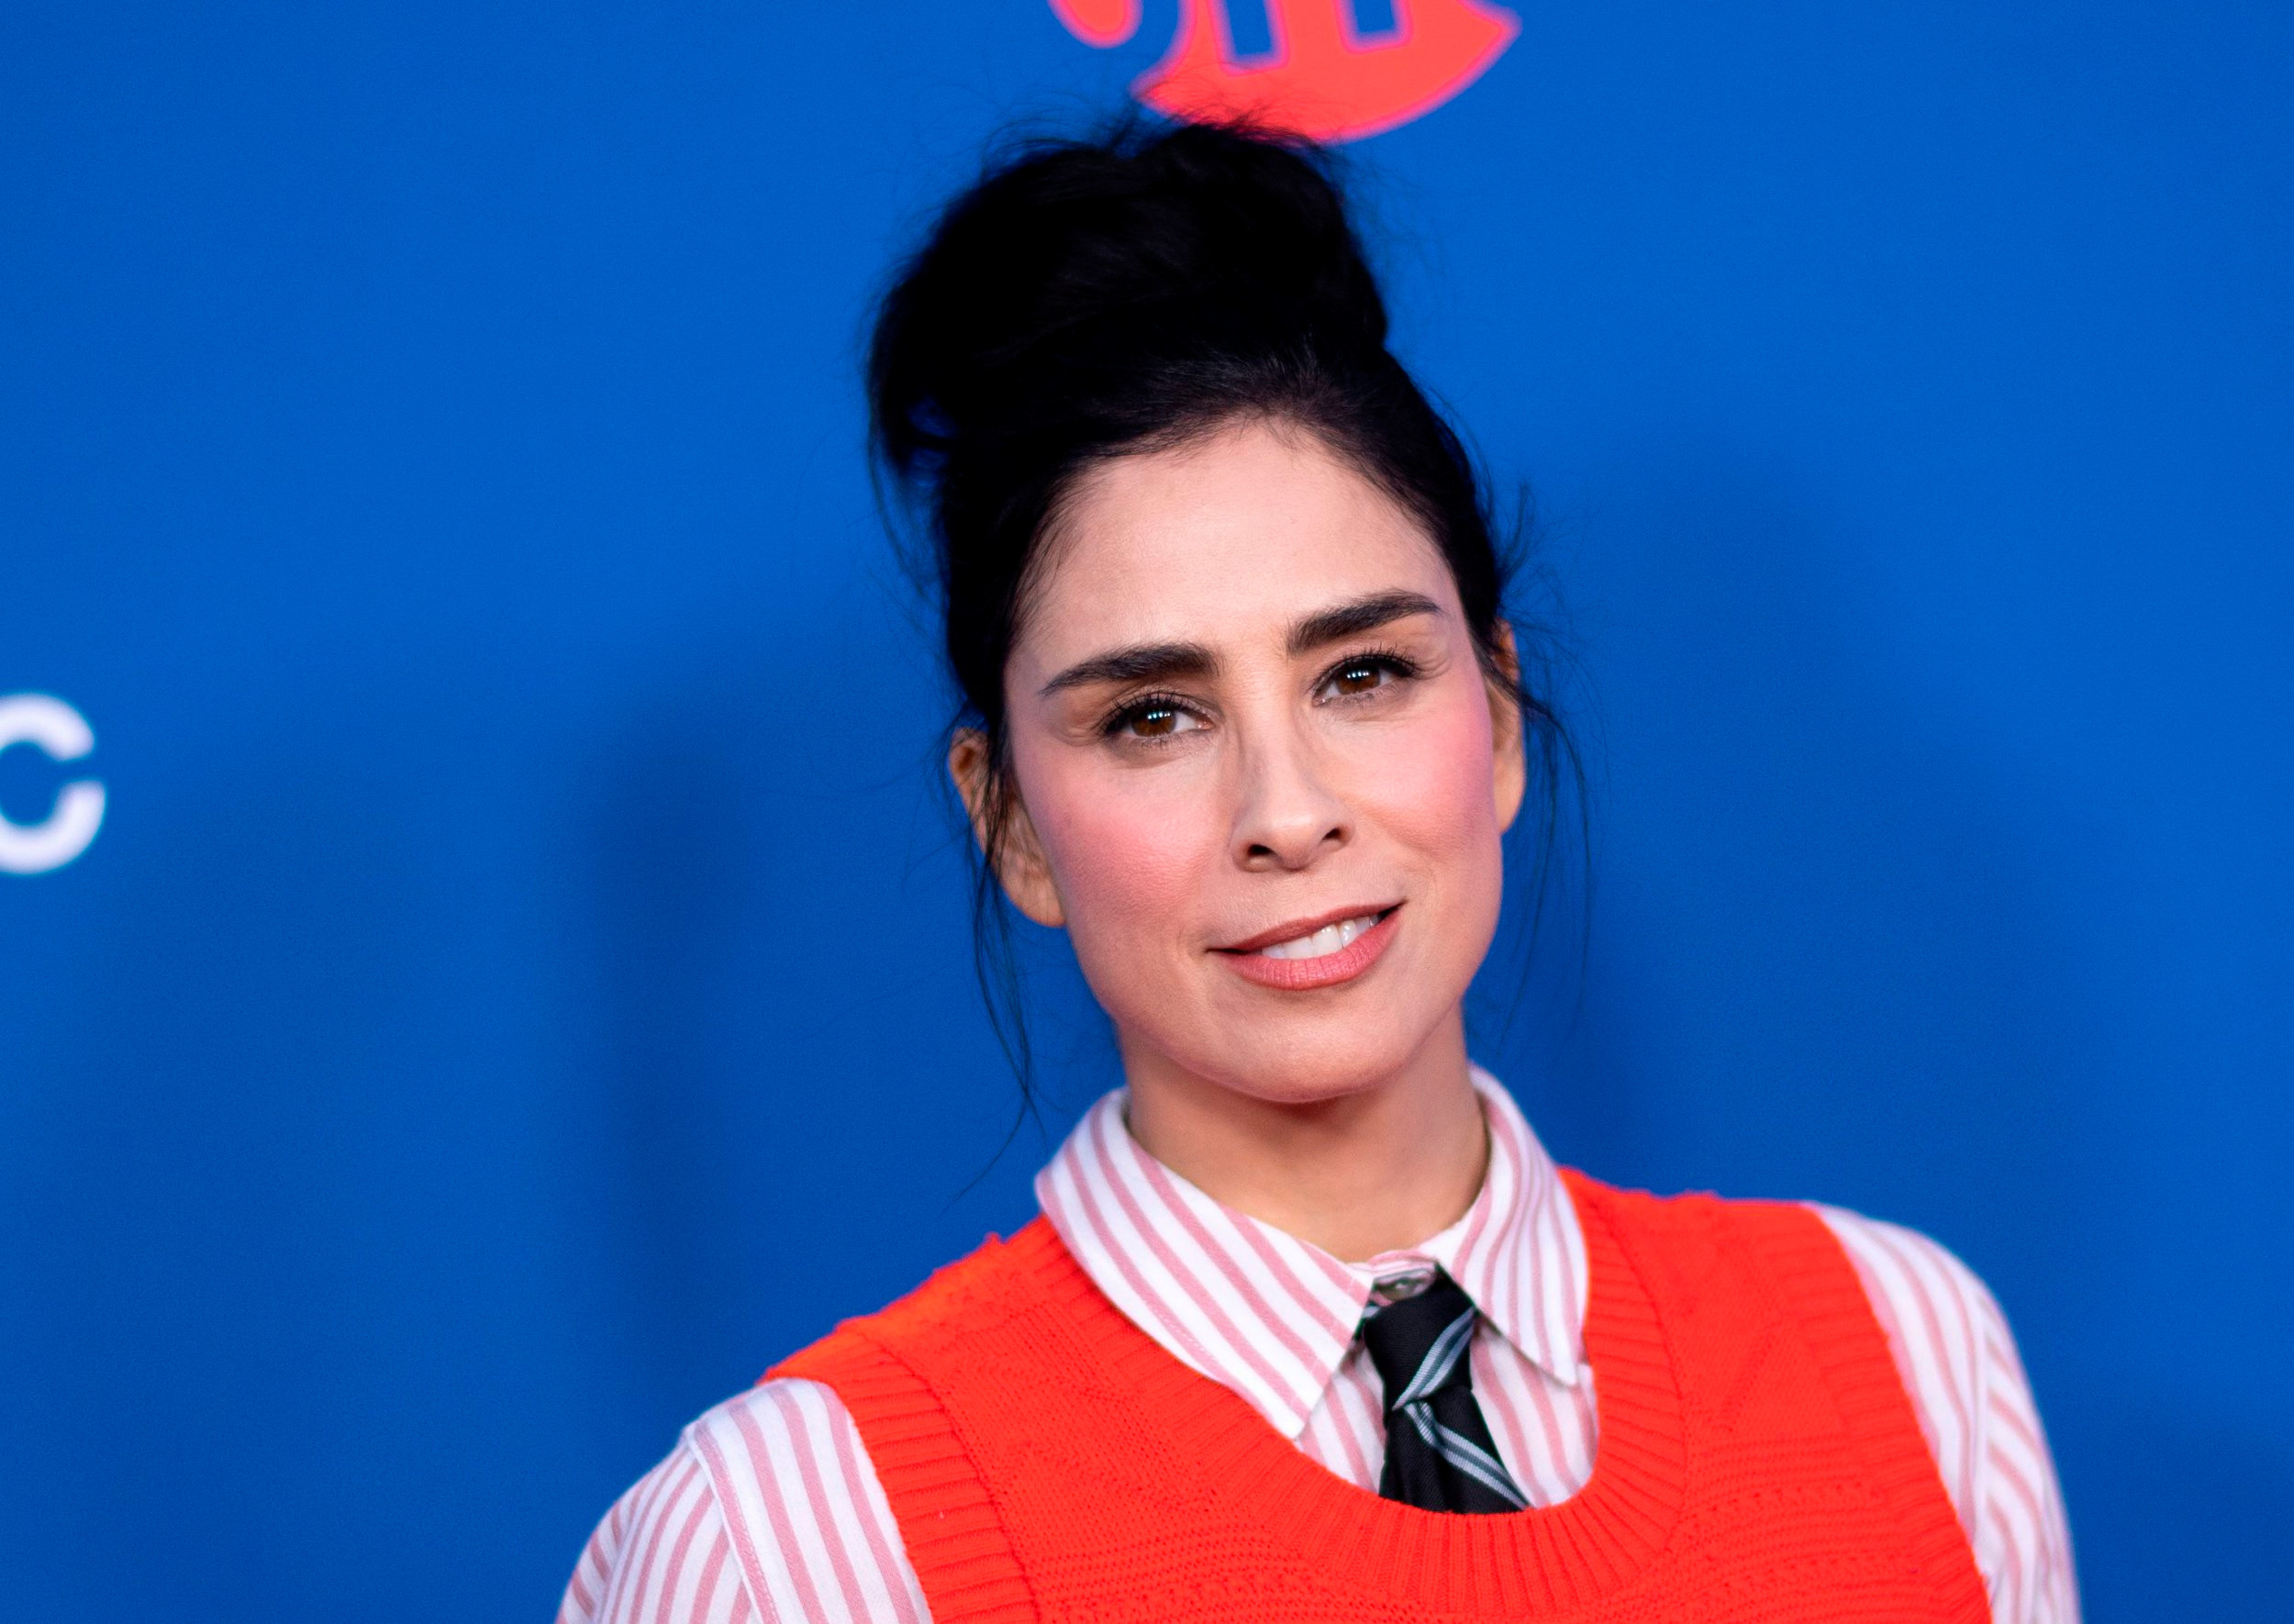 Sarah Silverman reflects on ‘unfortunate’ 2007 comments about Britney Spears: ‘I wish I could delete it’